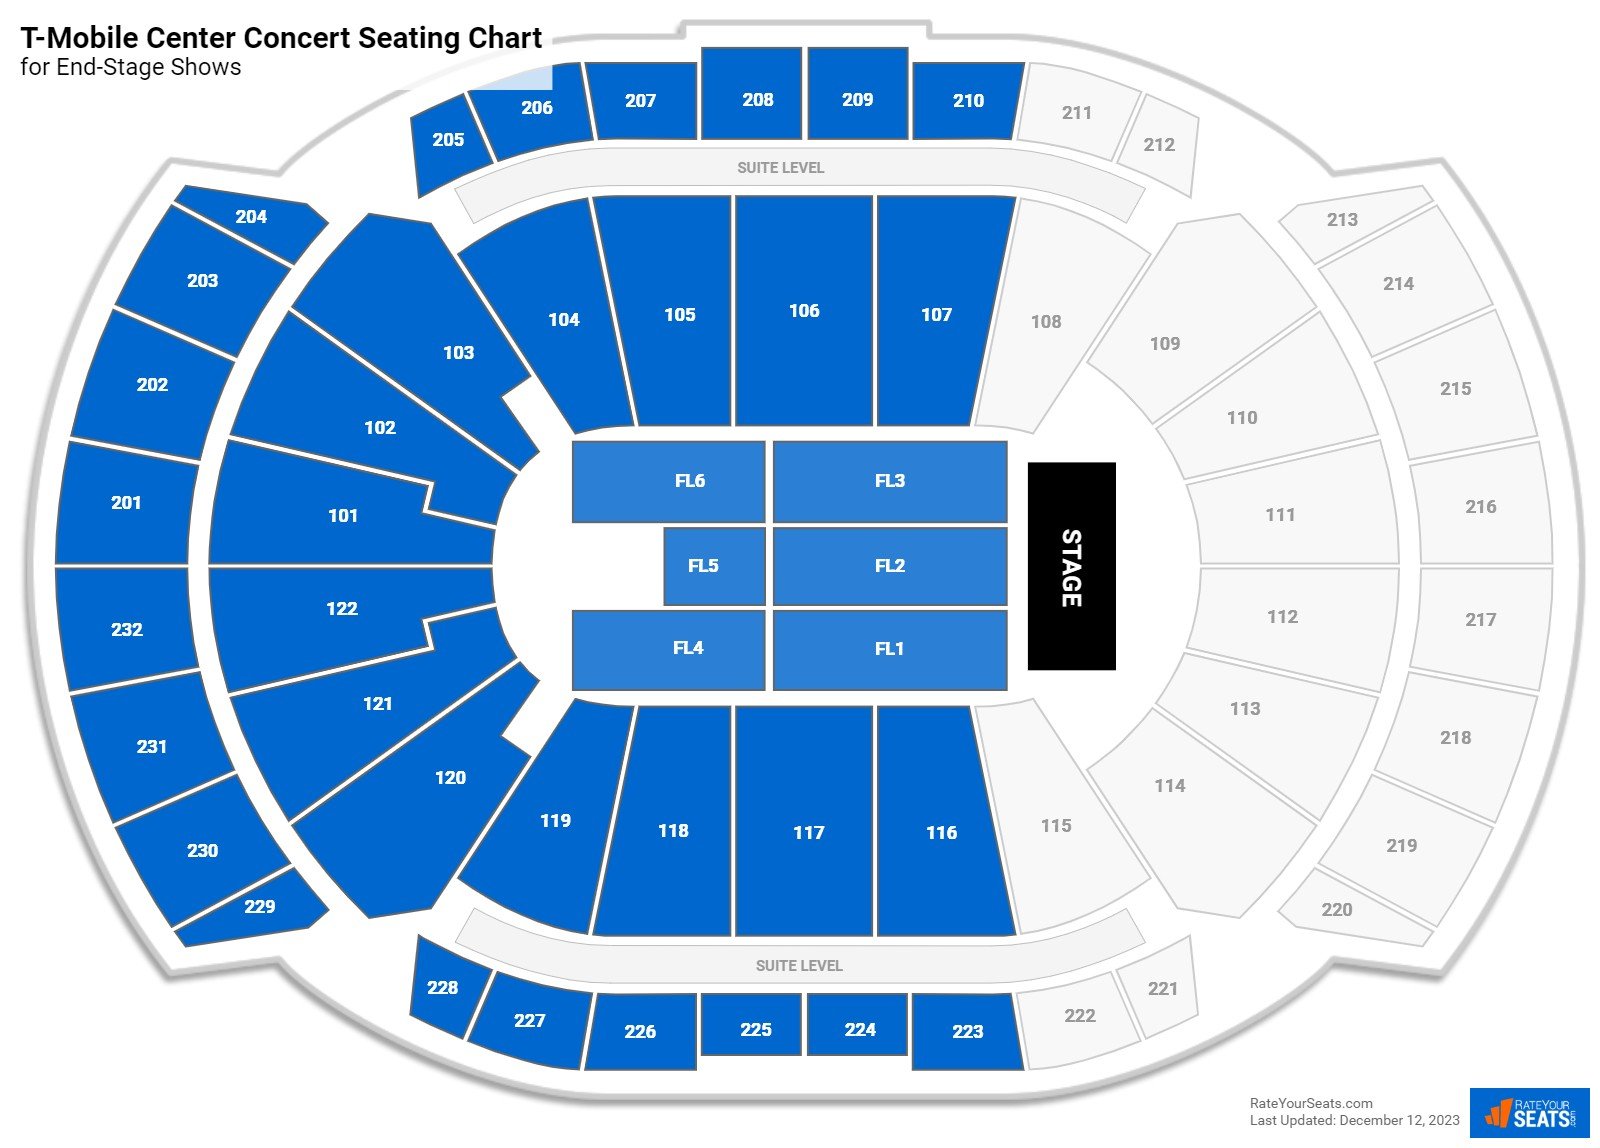 T-Mobile Center Concert Seating Chart